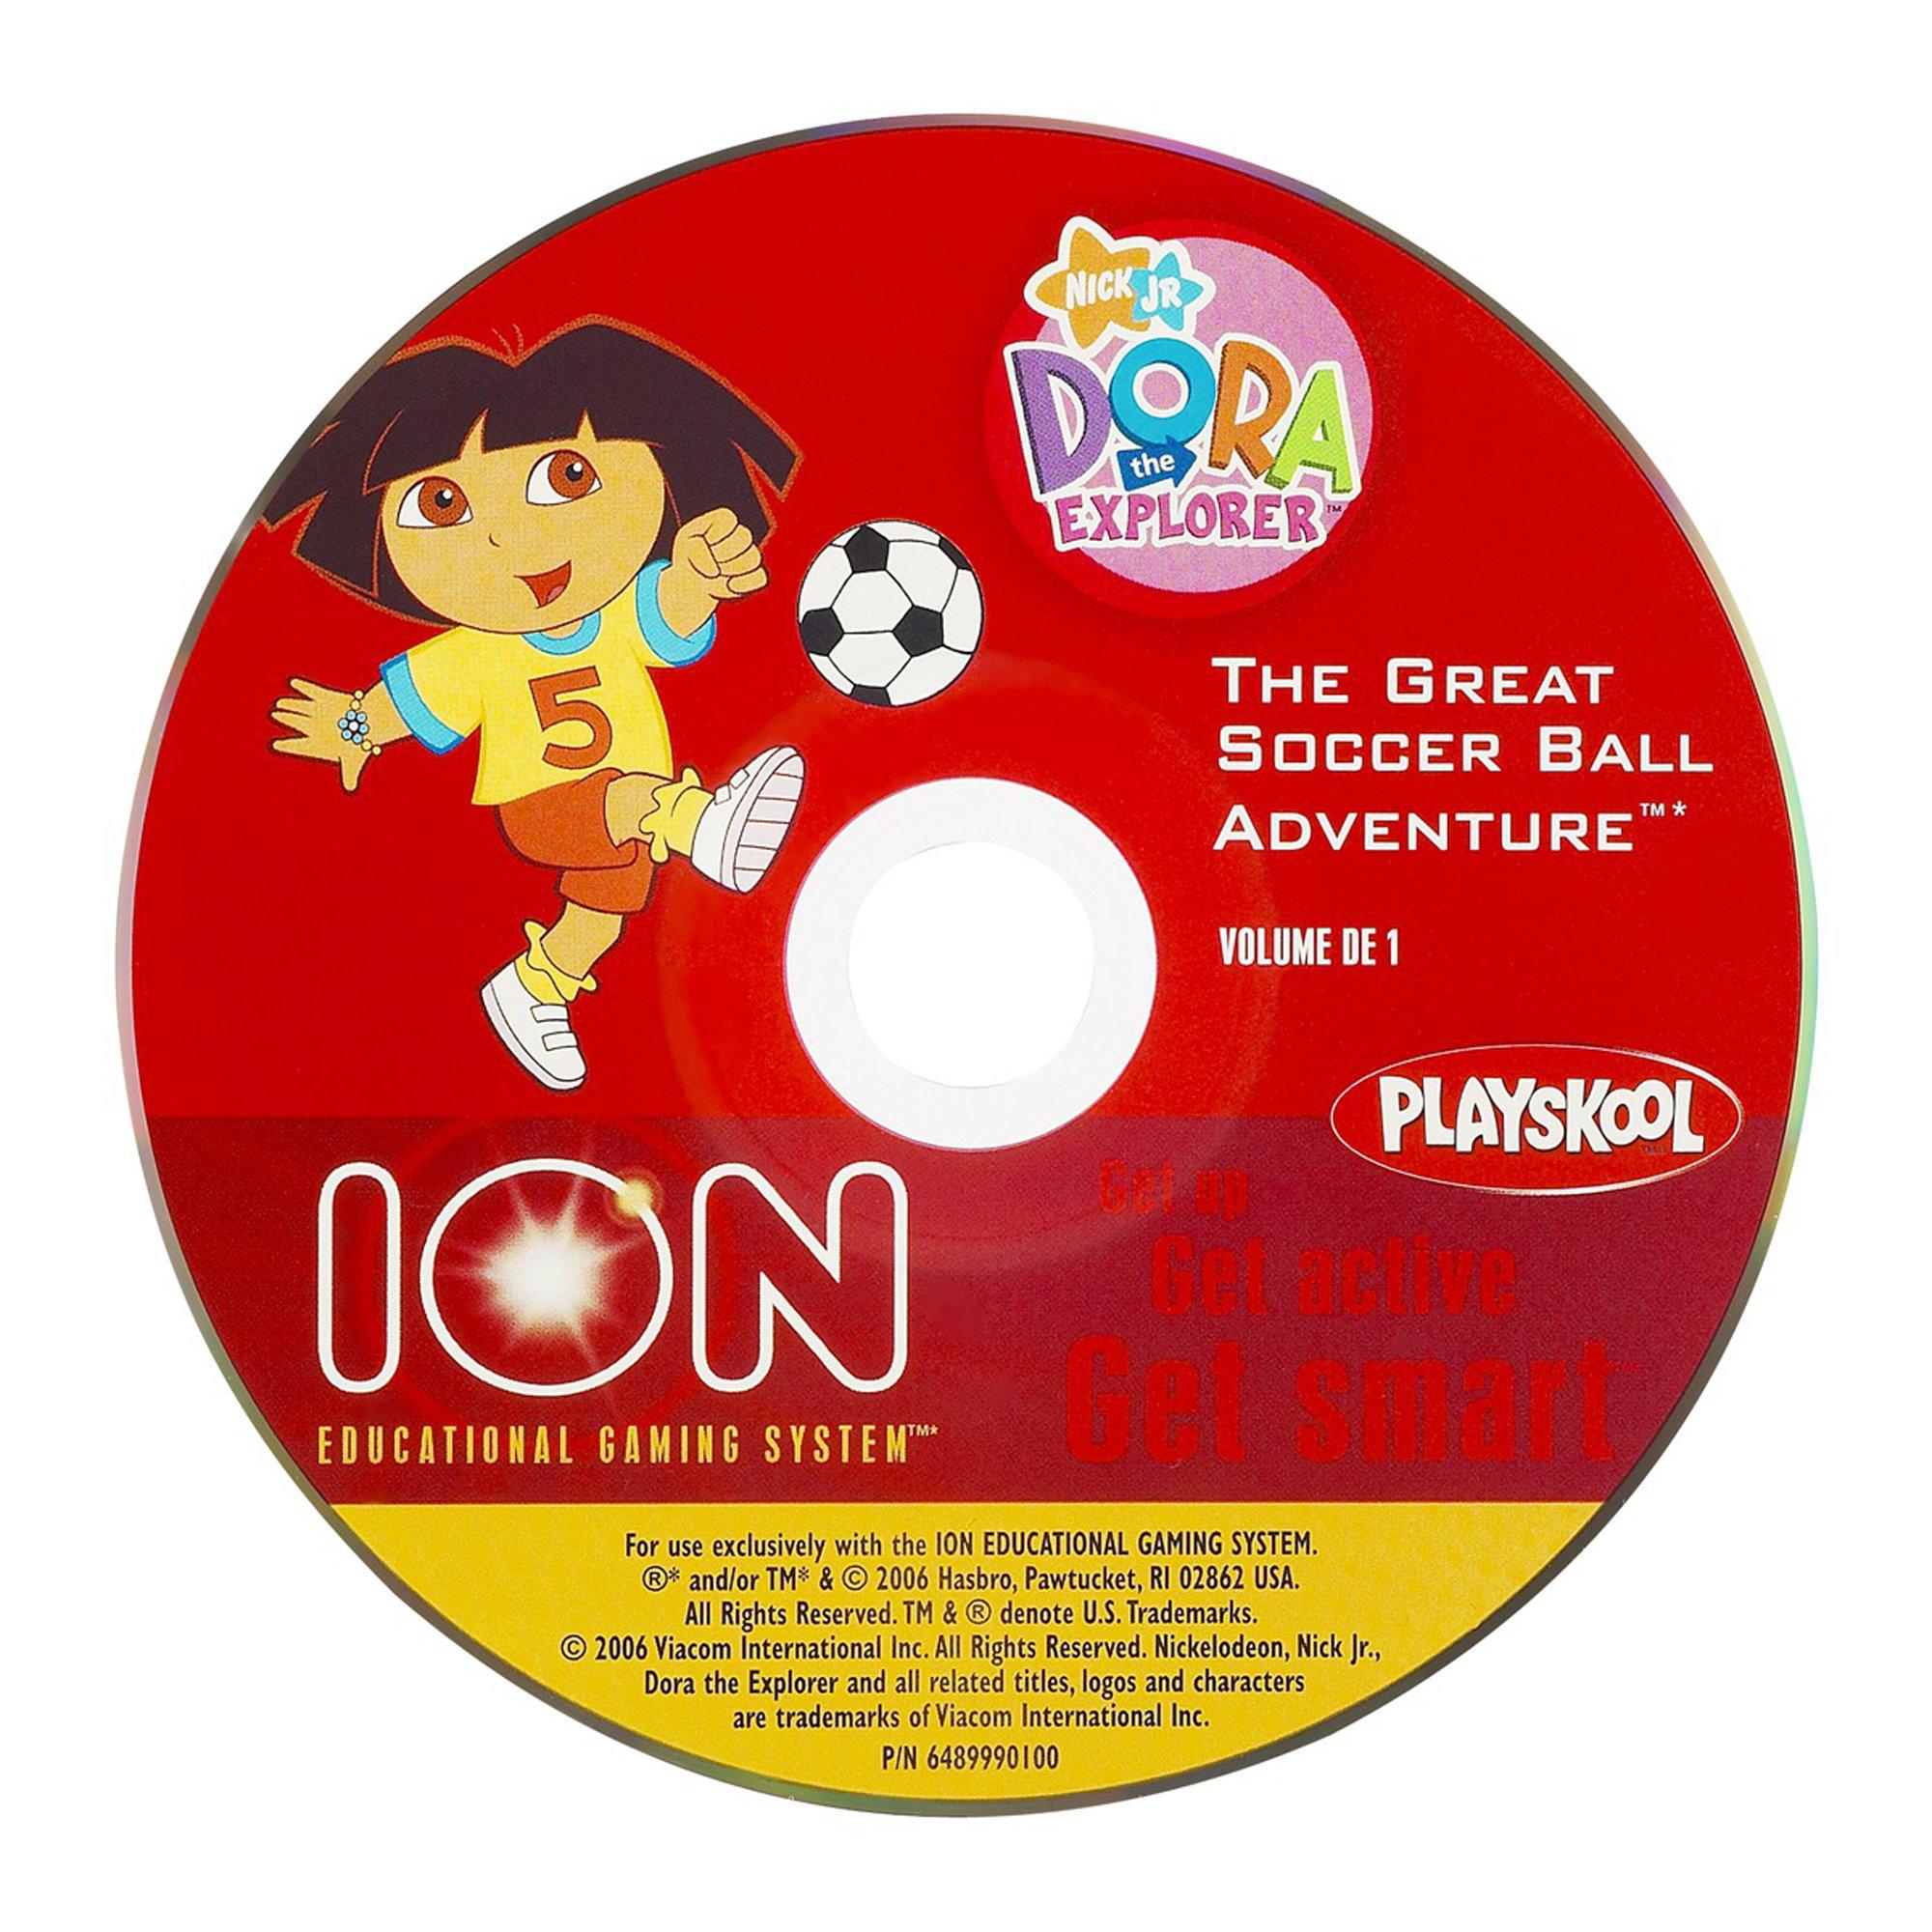 playskool ion educational gaming system active learning disc: dora the explorer - the great soccer ball adventure